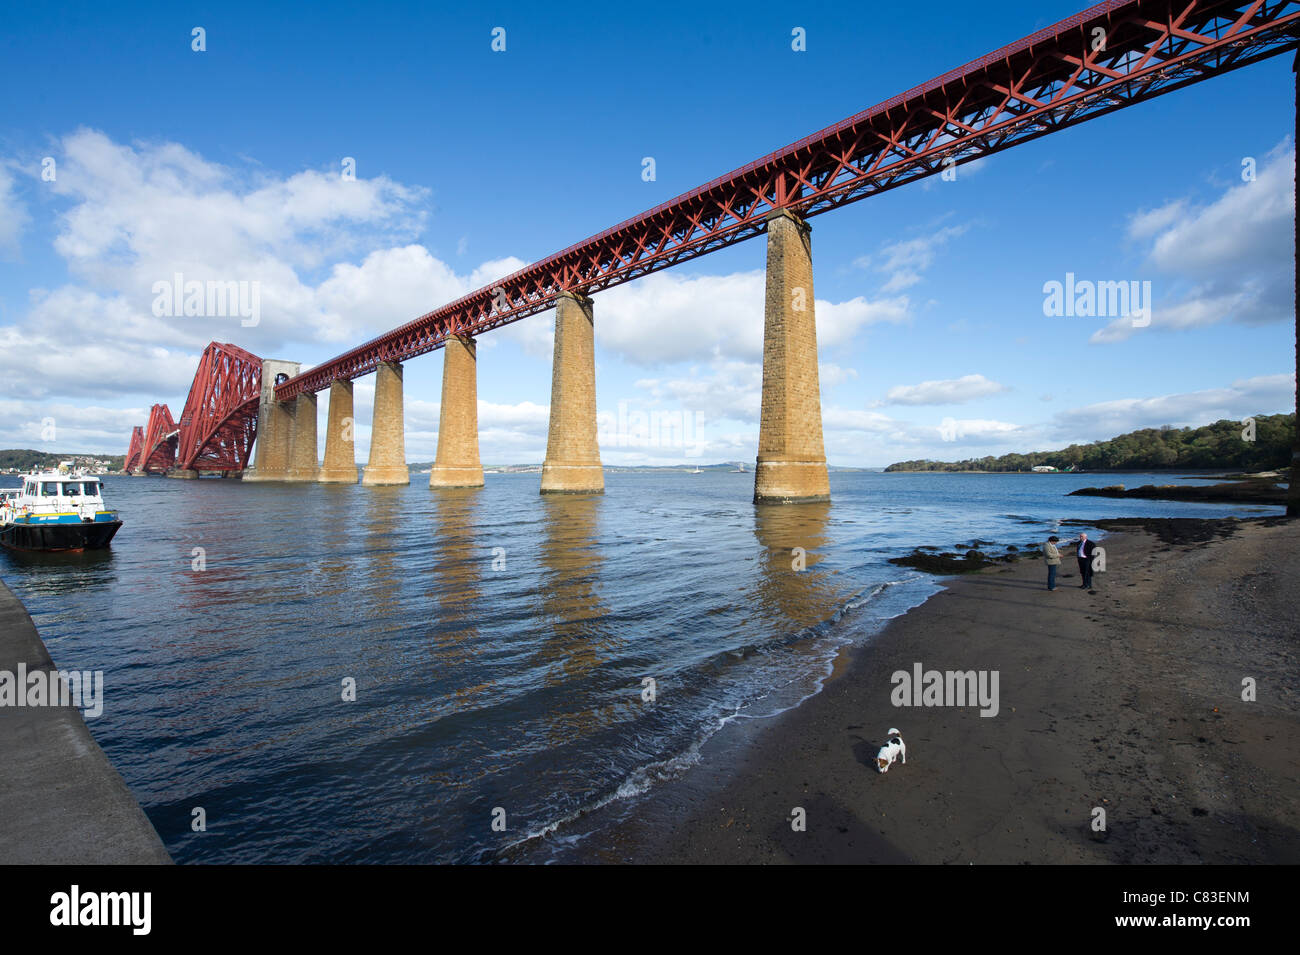 The Forth Rail Bridge spanning the Forth Estuary between East Lothian and Fife in Scotland Stock Photo